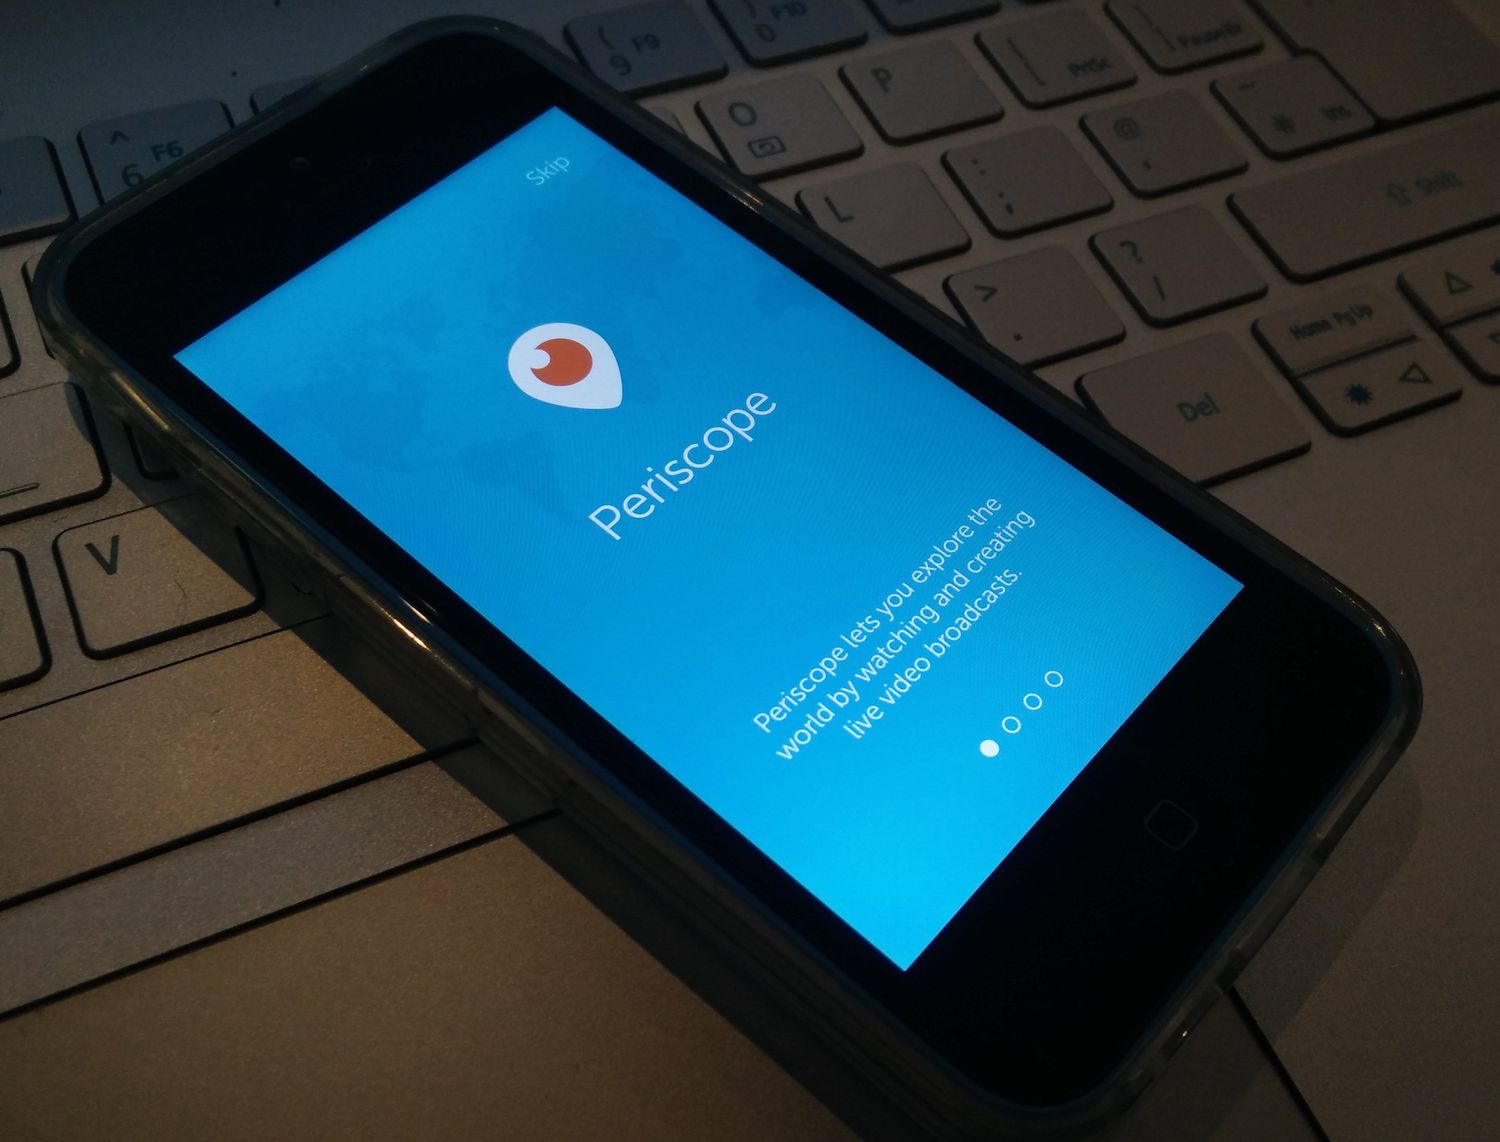 twitters-livestreaming-app-periscope-launches-on-android